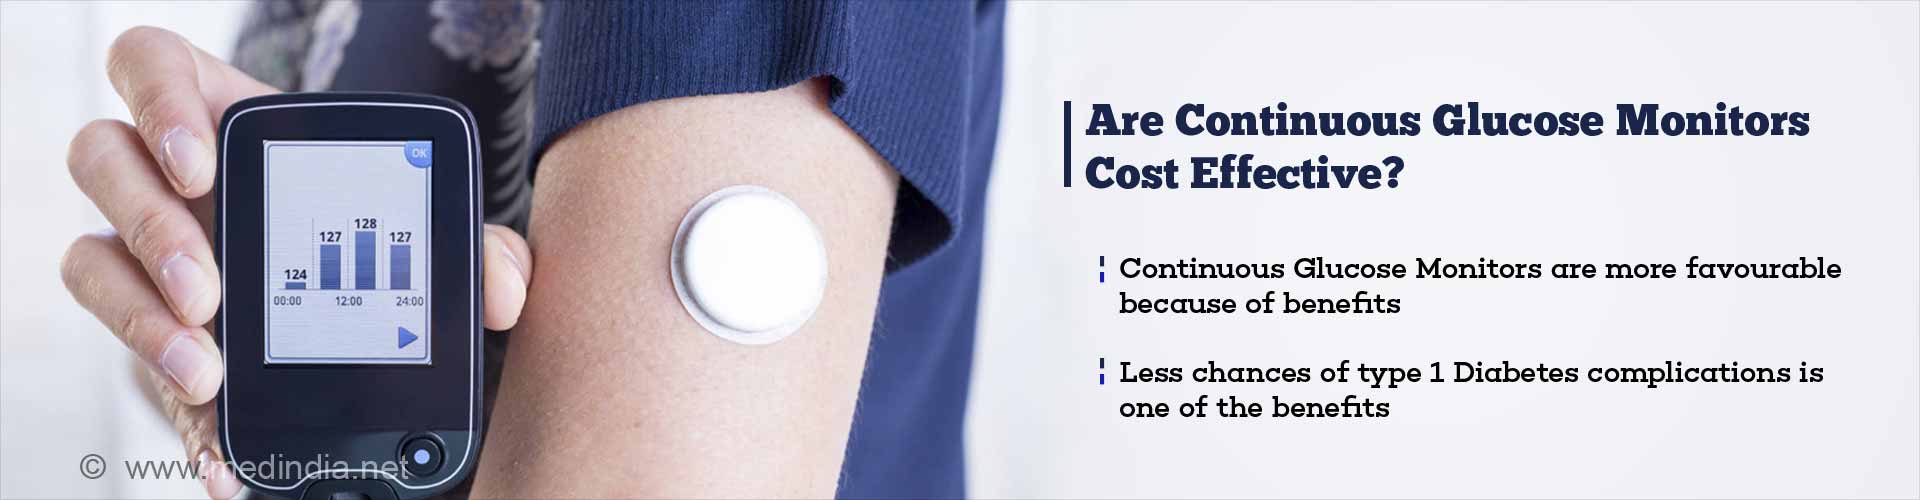 are continuous glucose monitors cost effective?
- continuous glucose monitors are more favourable because of benefits
- less chances of type 1 diabetes complications is one of the benefits